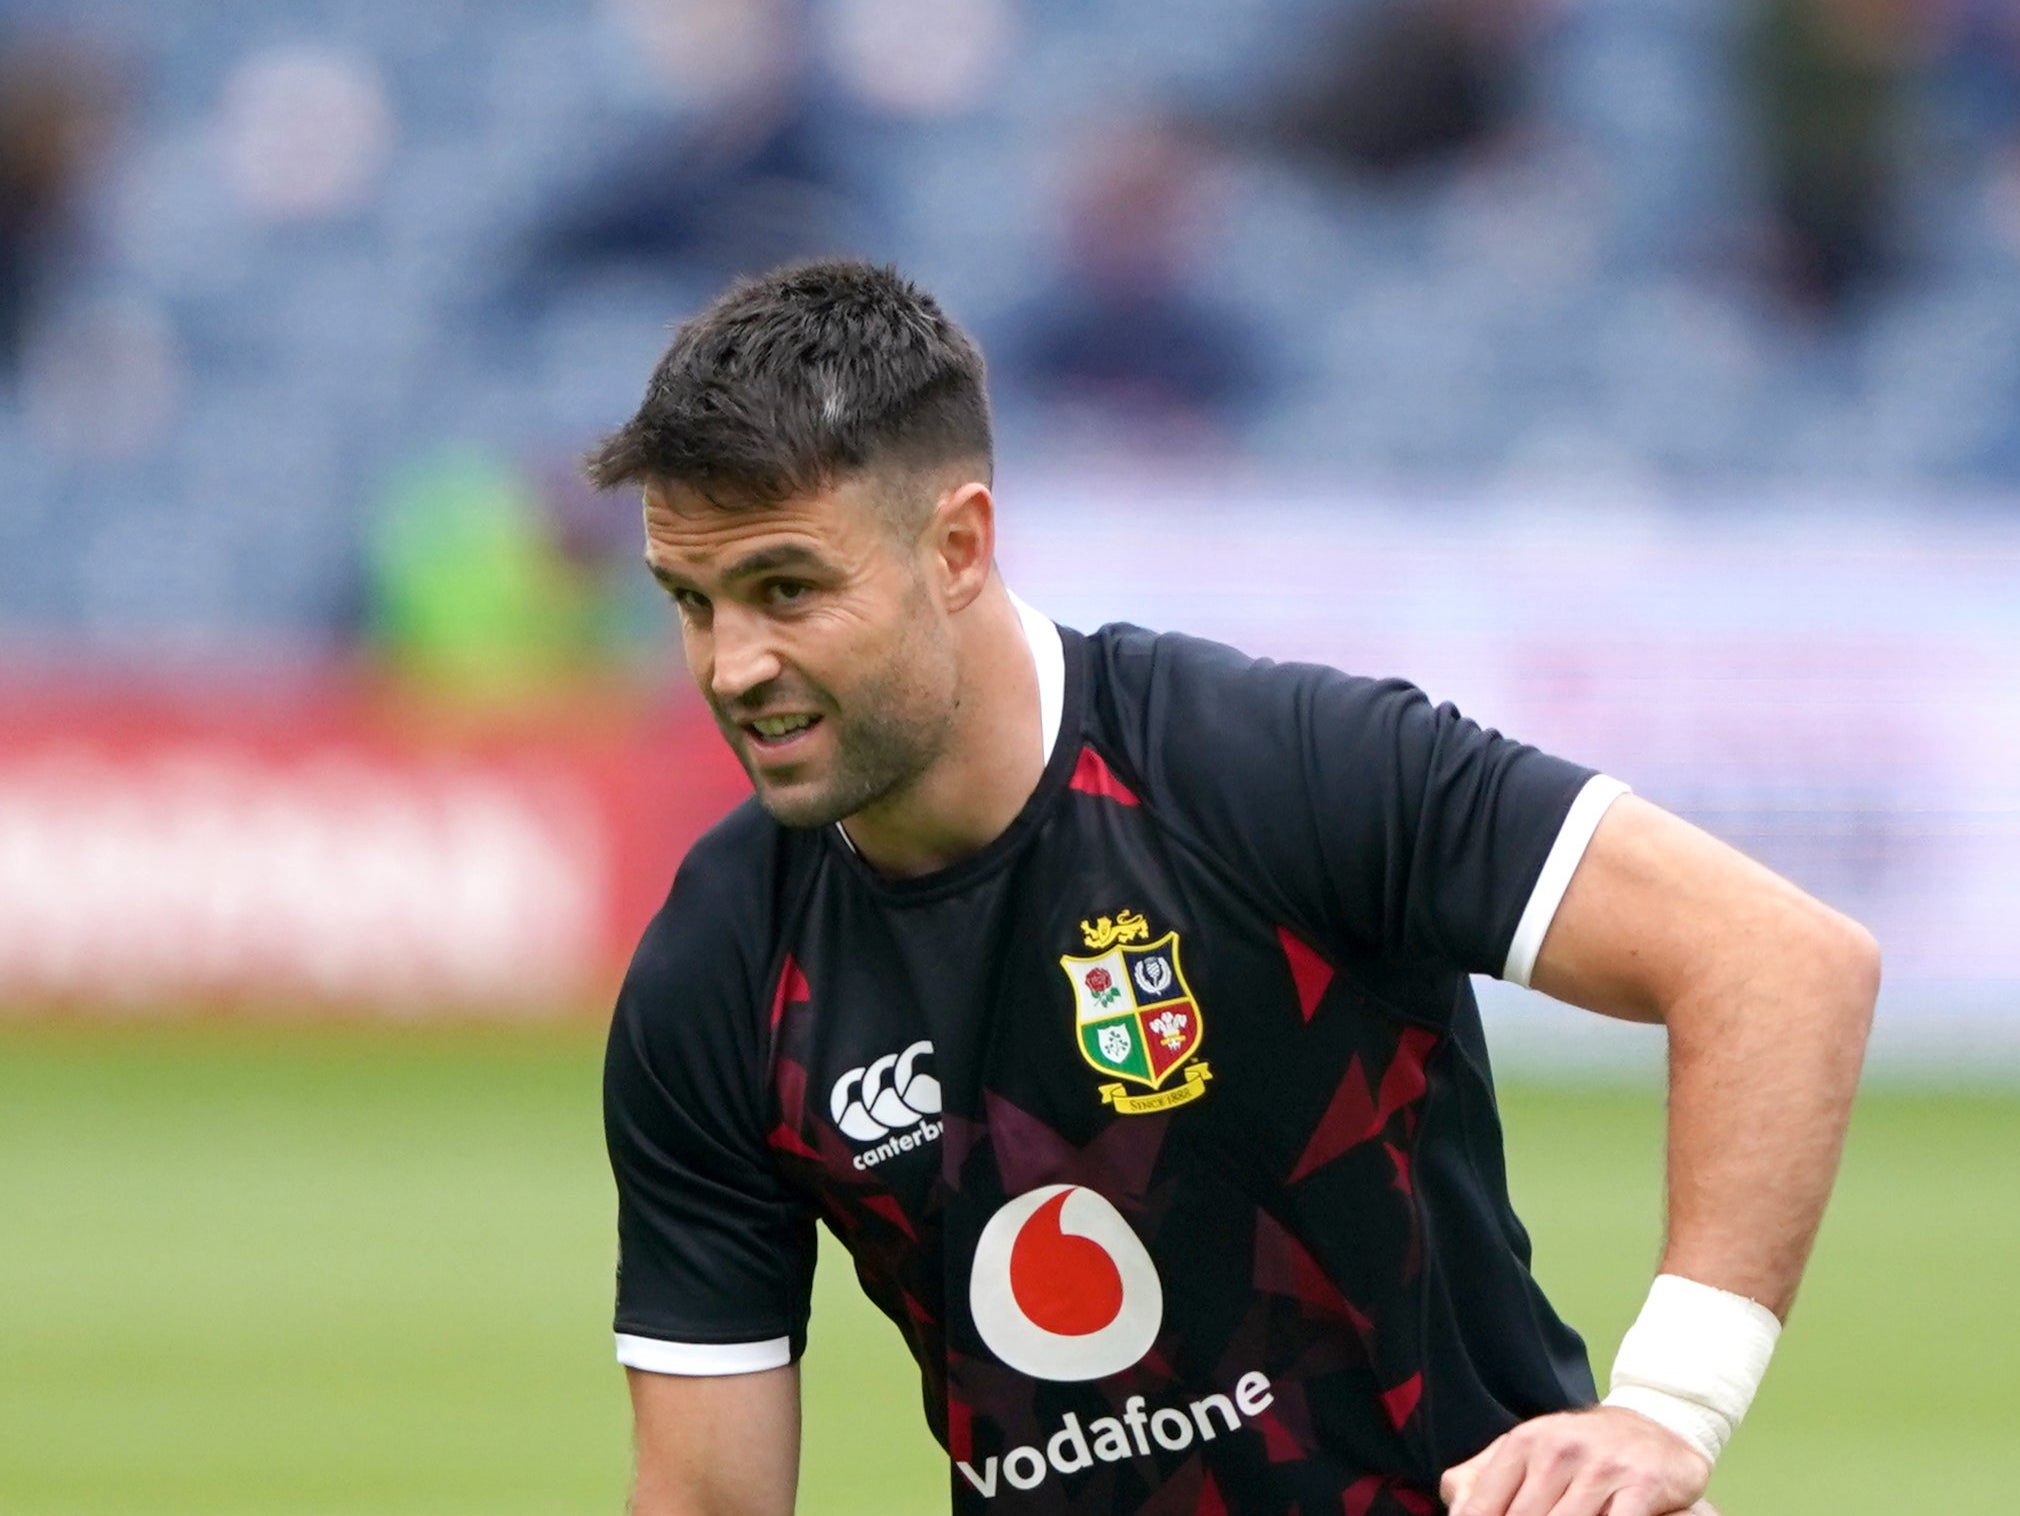 Conor Murray has never captained Ireland